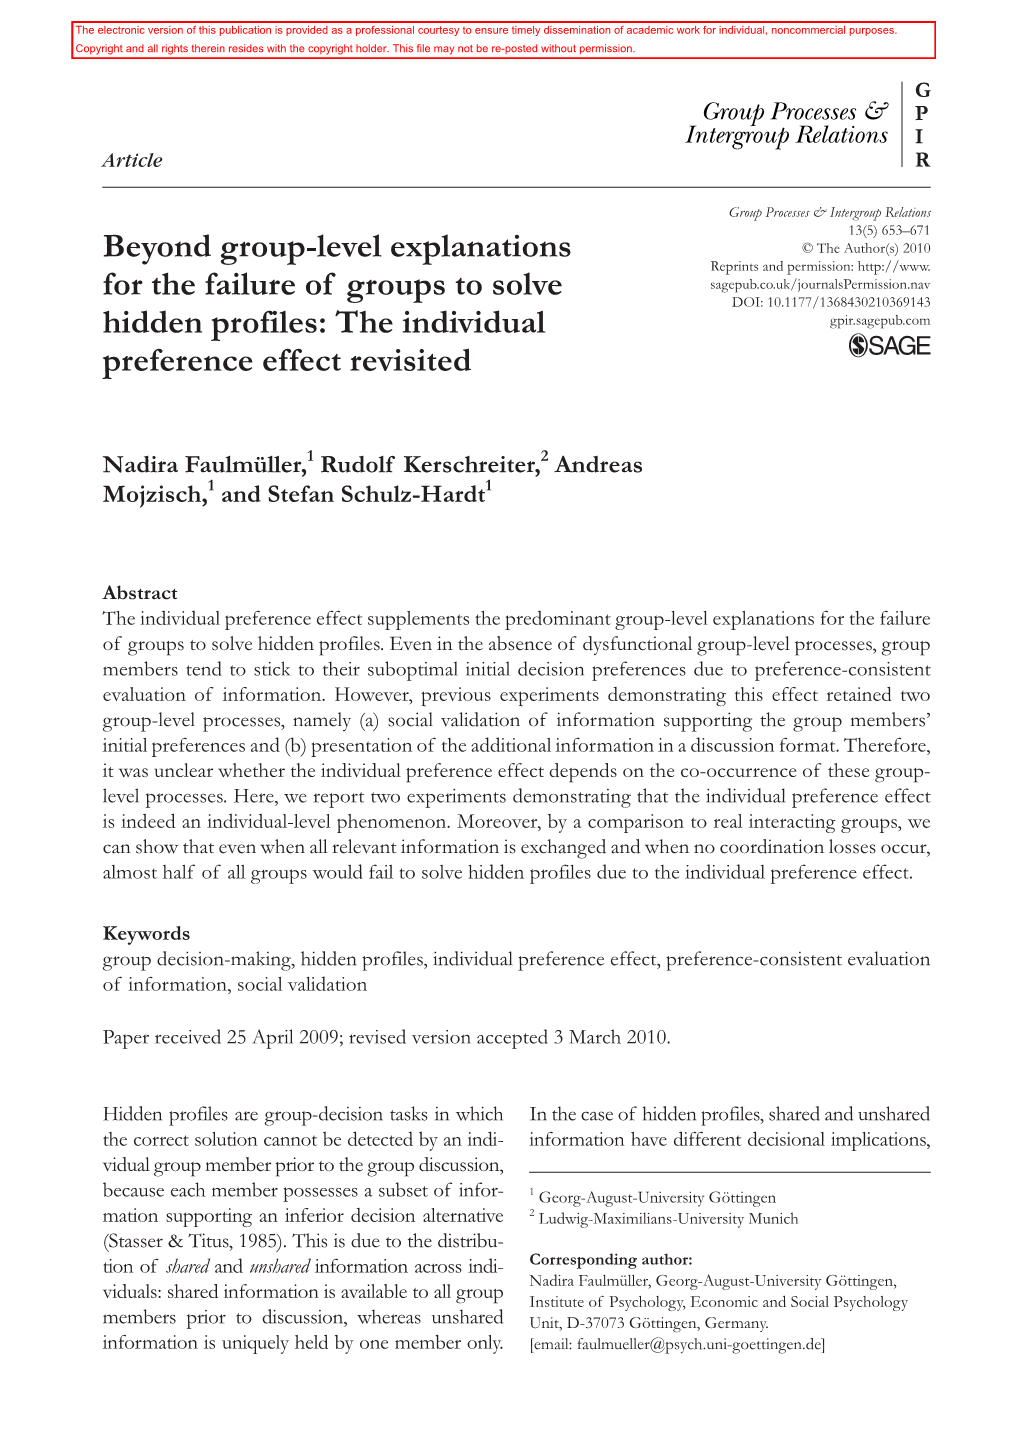 Beyond Group-Level Explanations for the Failure of Groups